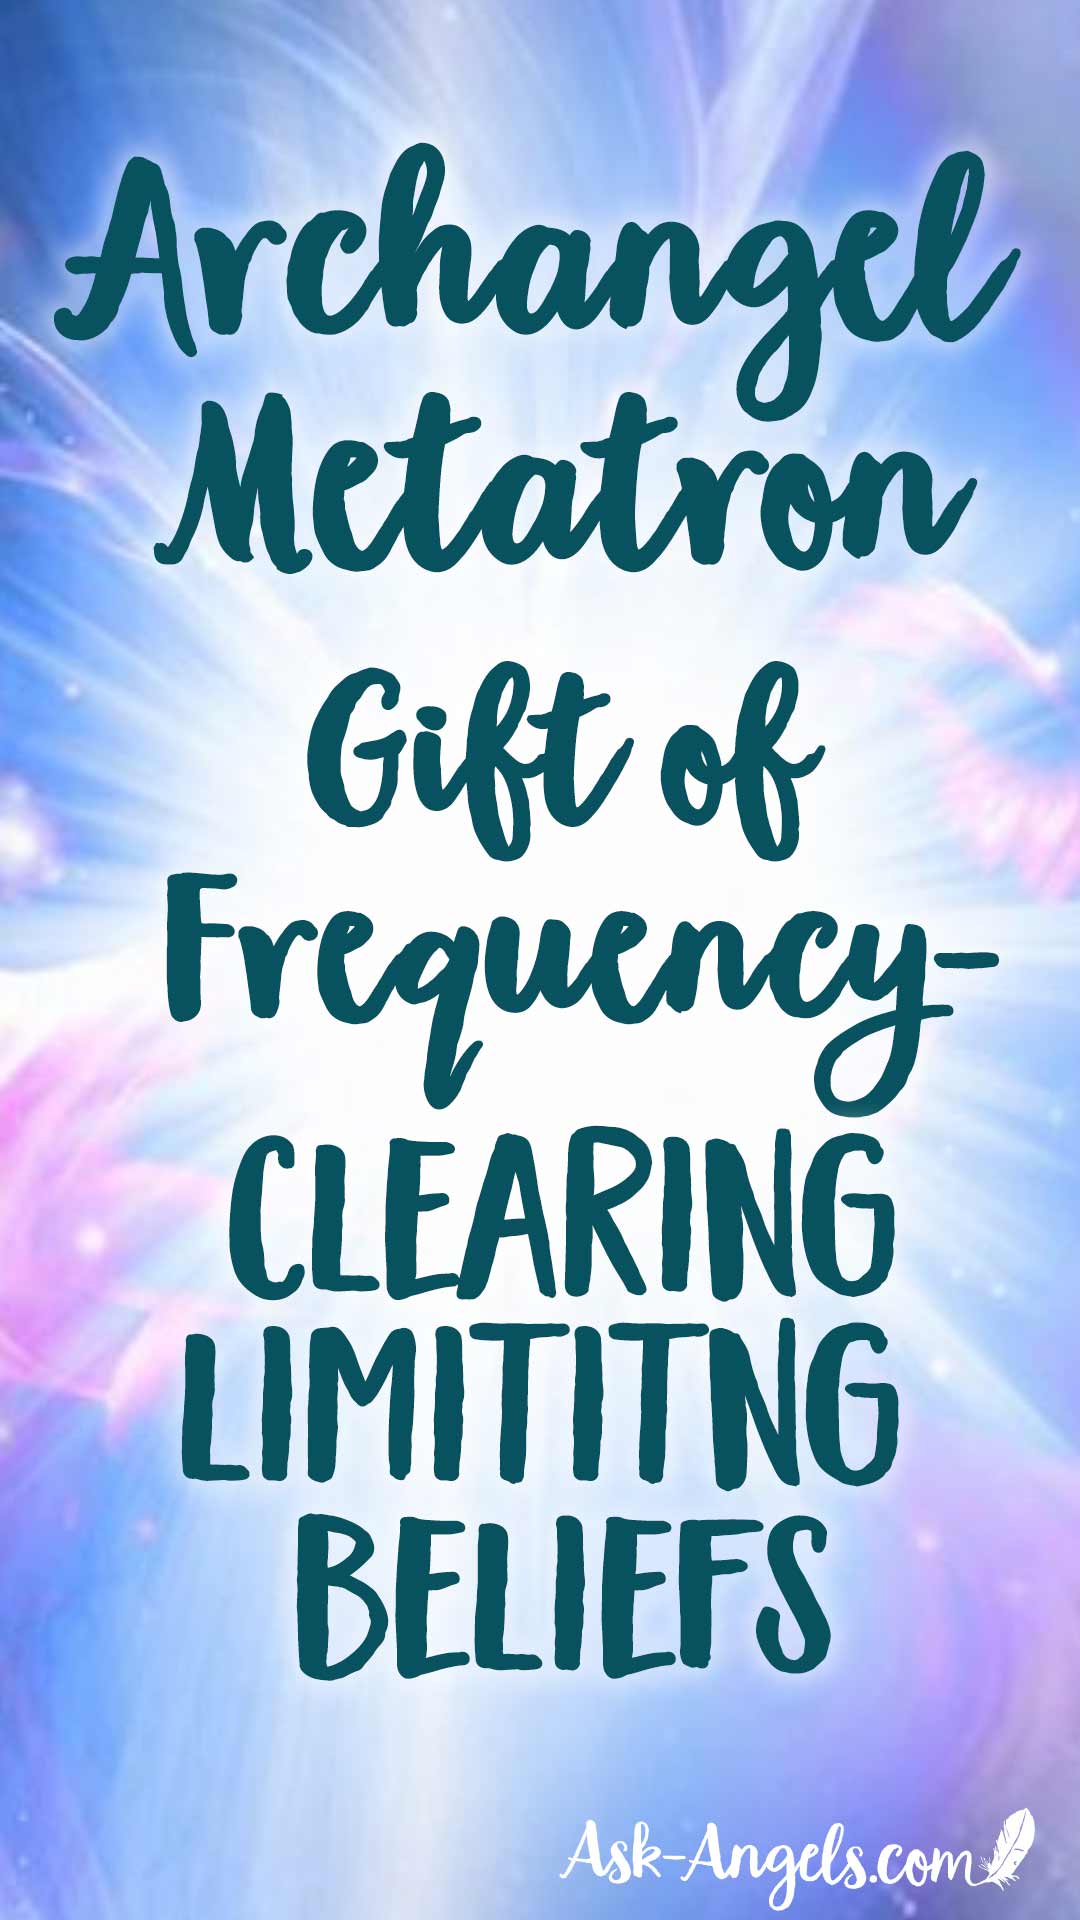 Archangel Metatron connects with a gift of frequency to support you in clearing limiting beliefs in this free angel message. #metatron